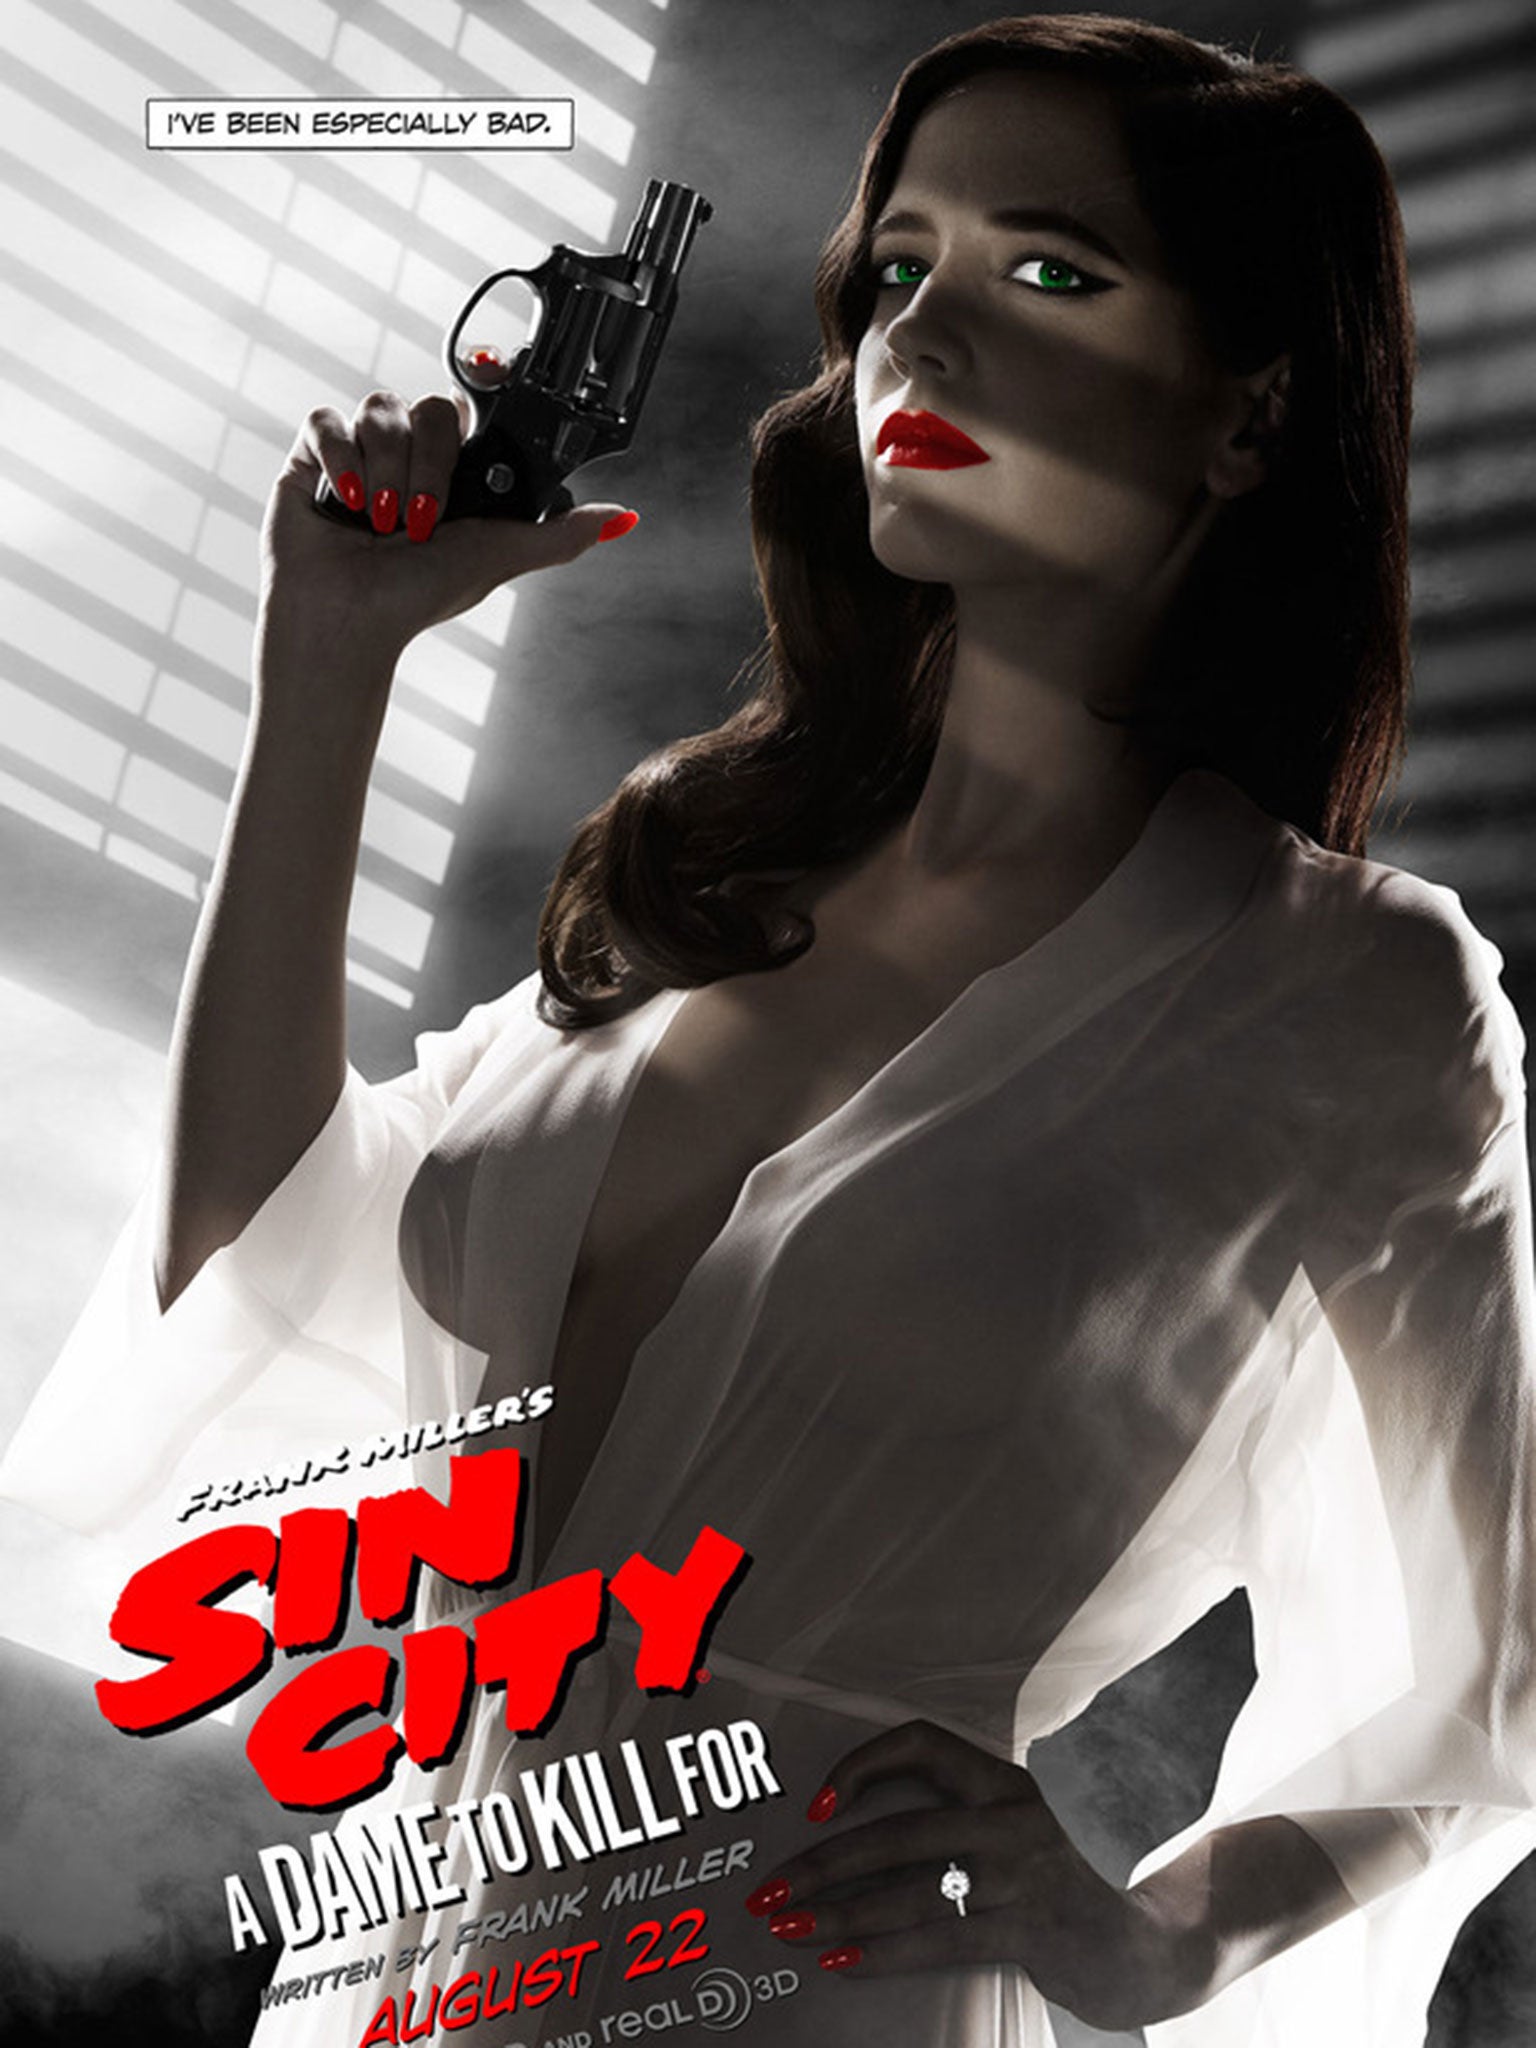 Eva Green in a Sin City 2 posted deemed inappropriate by the MPAA